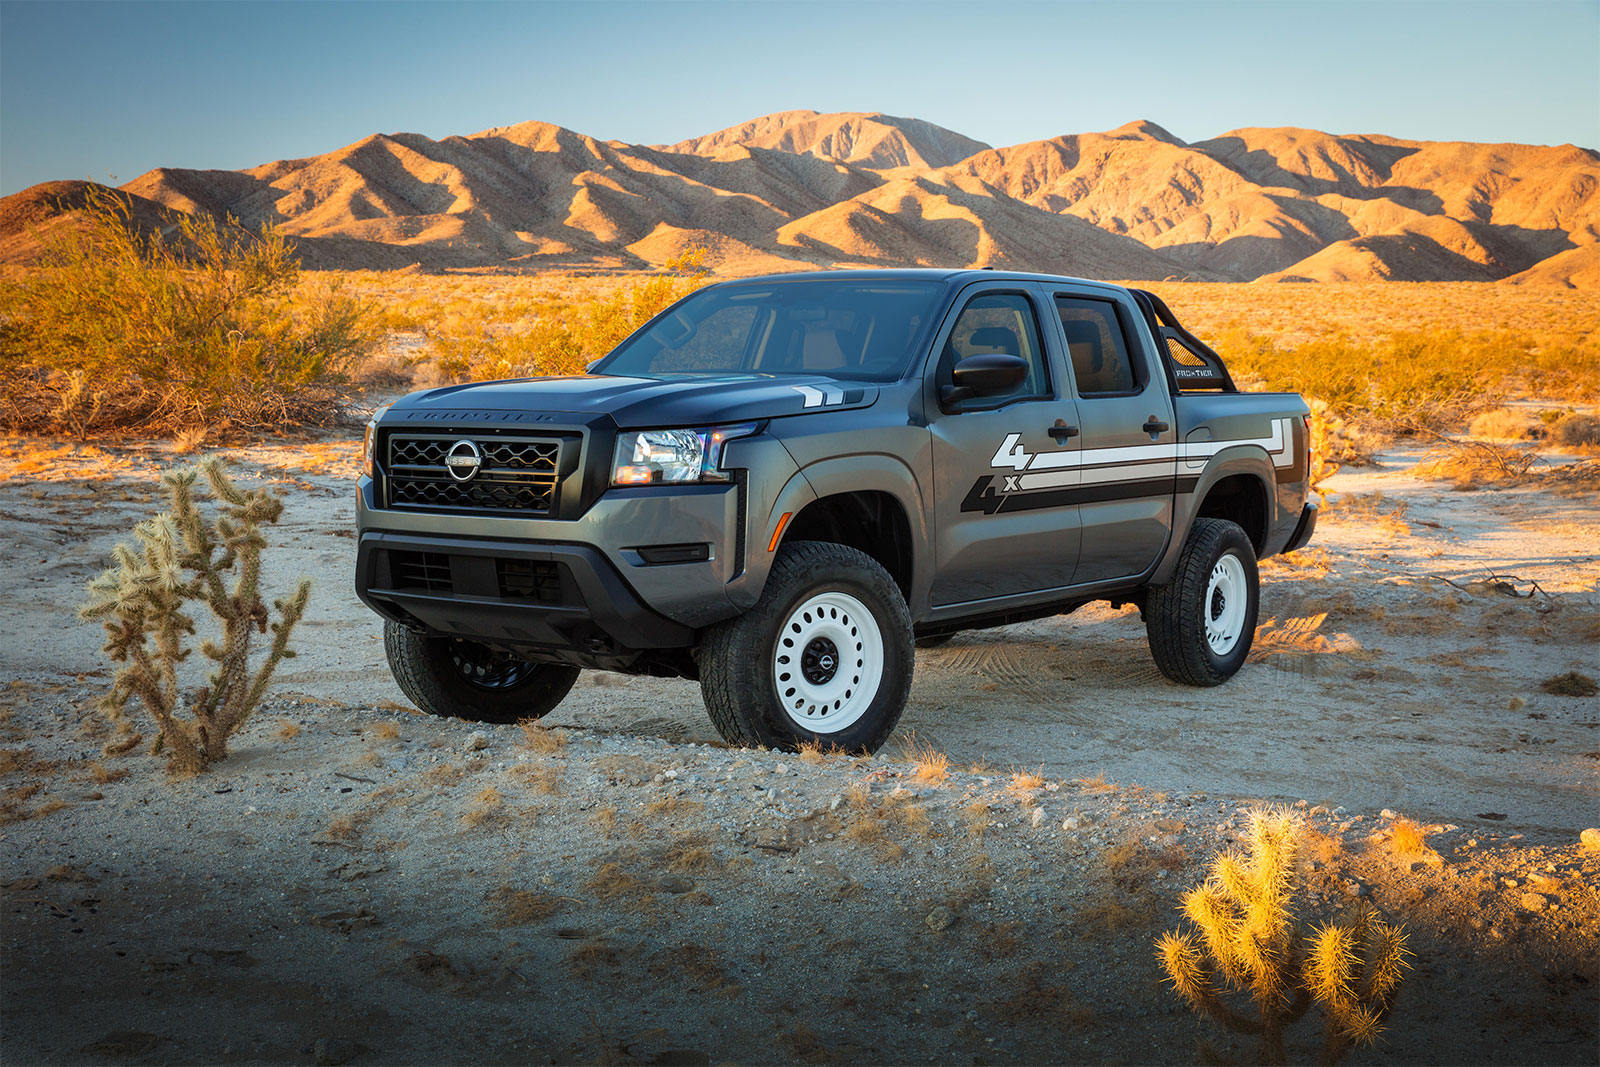 Nissan Frontier Sv 4X4 Vs Pro 4X: Unveiling the Ultimate Off-Roading Battle